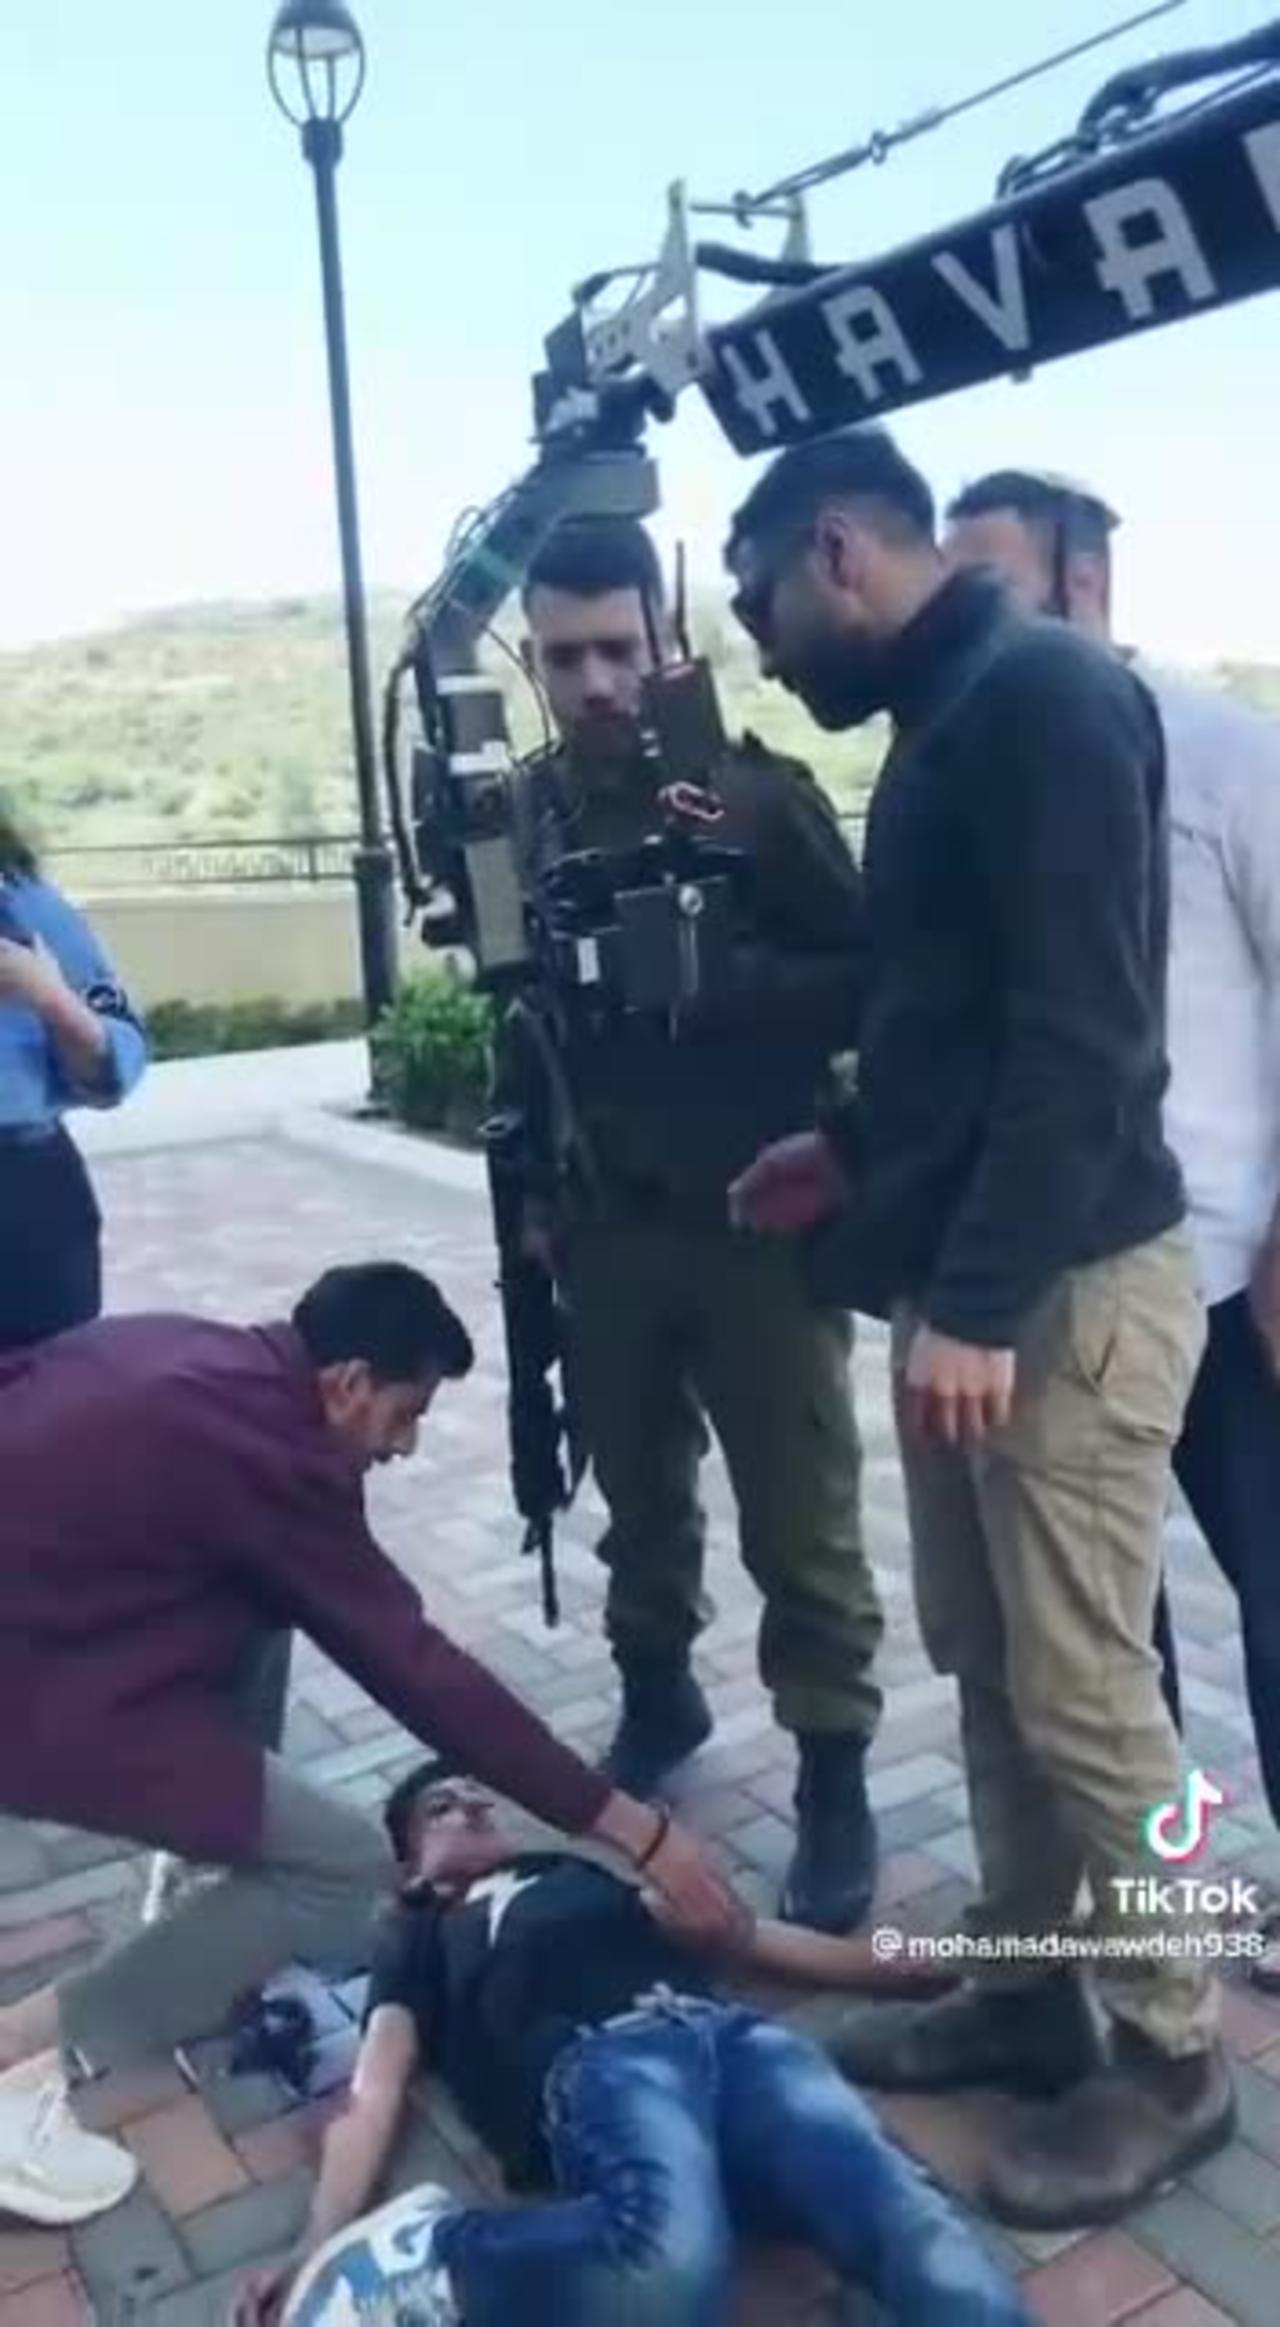 WATCH: Video shows the war between Palestine and Israel is being staged like a movie.